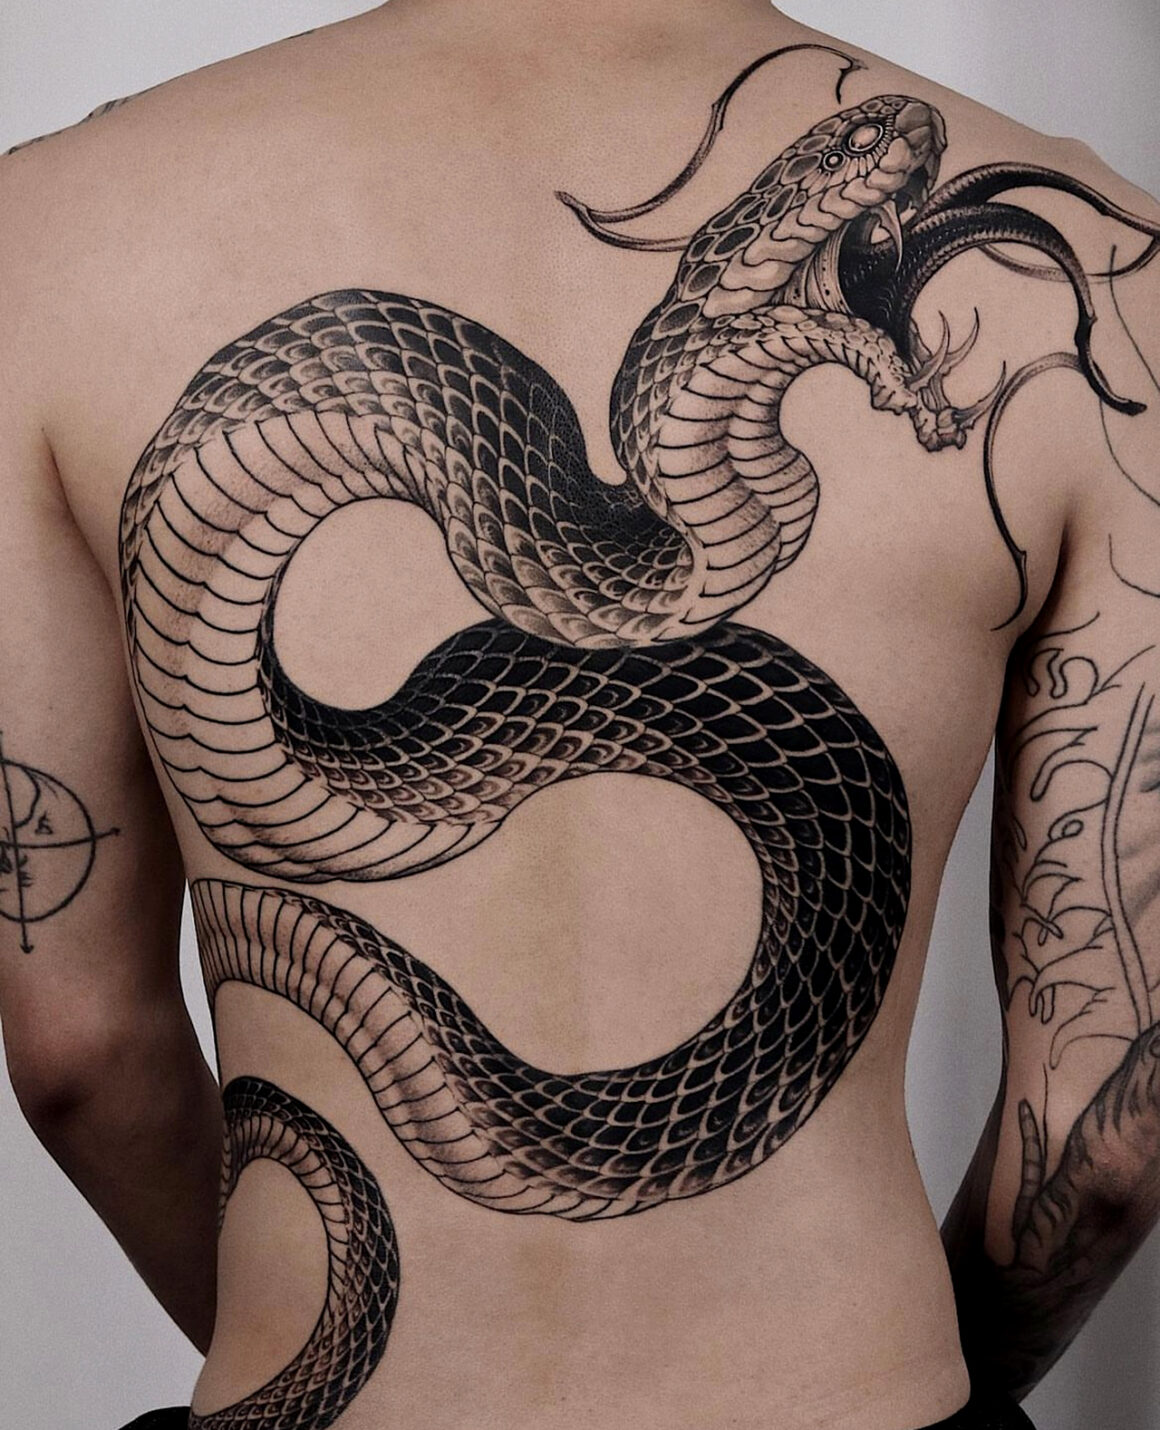 Tattoo by Hoon Unco, @uncogrim